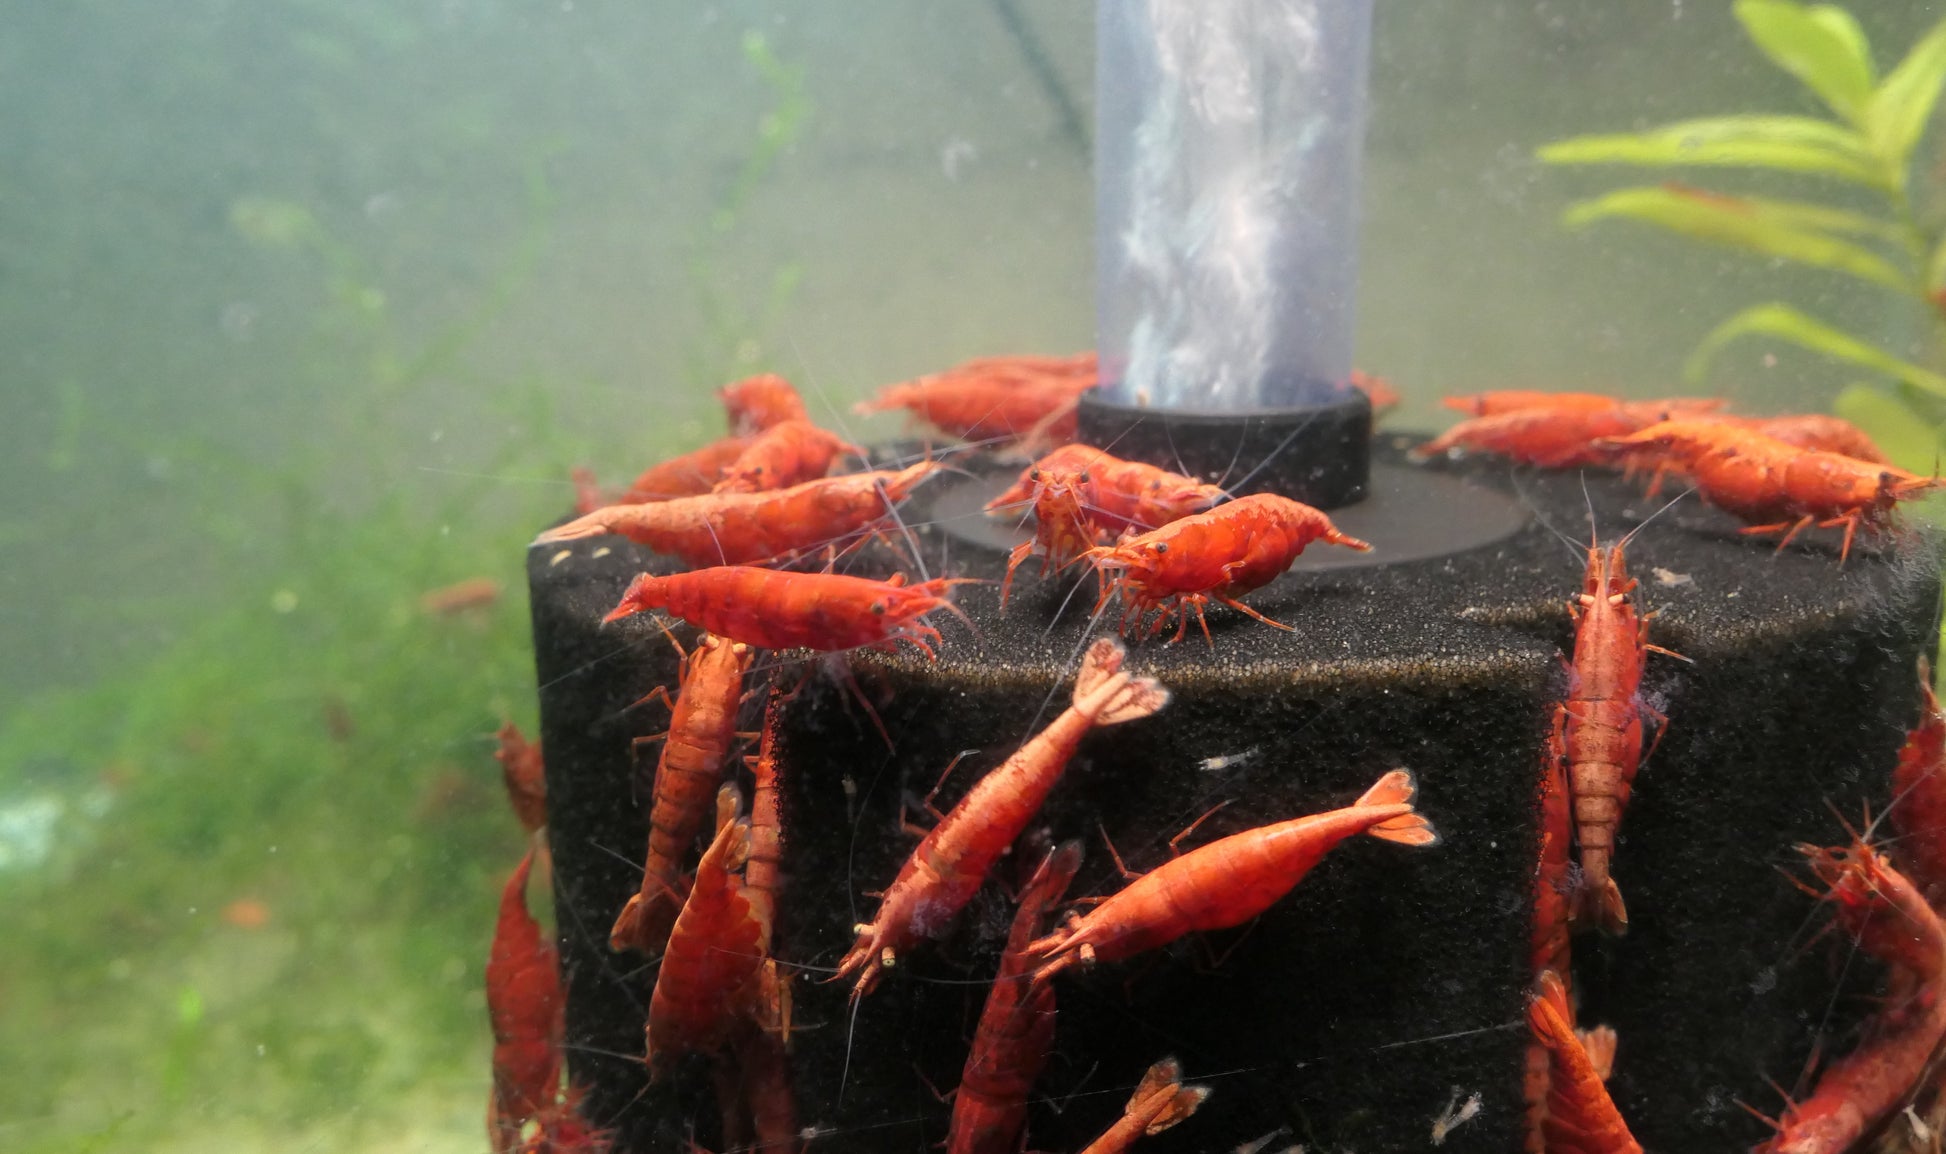 Painted Fire Red Cherry Shrimp from Cherry Shrimp Canada. Striking red colours. Bold and vibrant red.